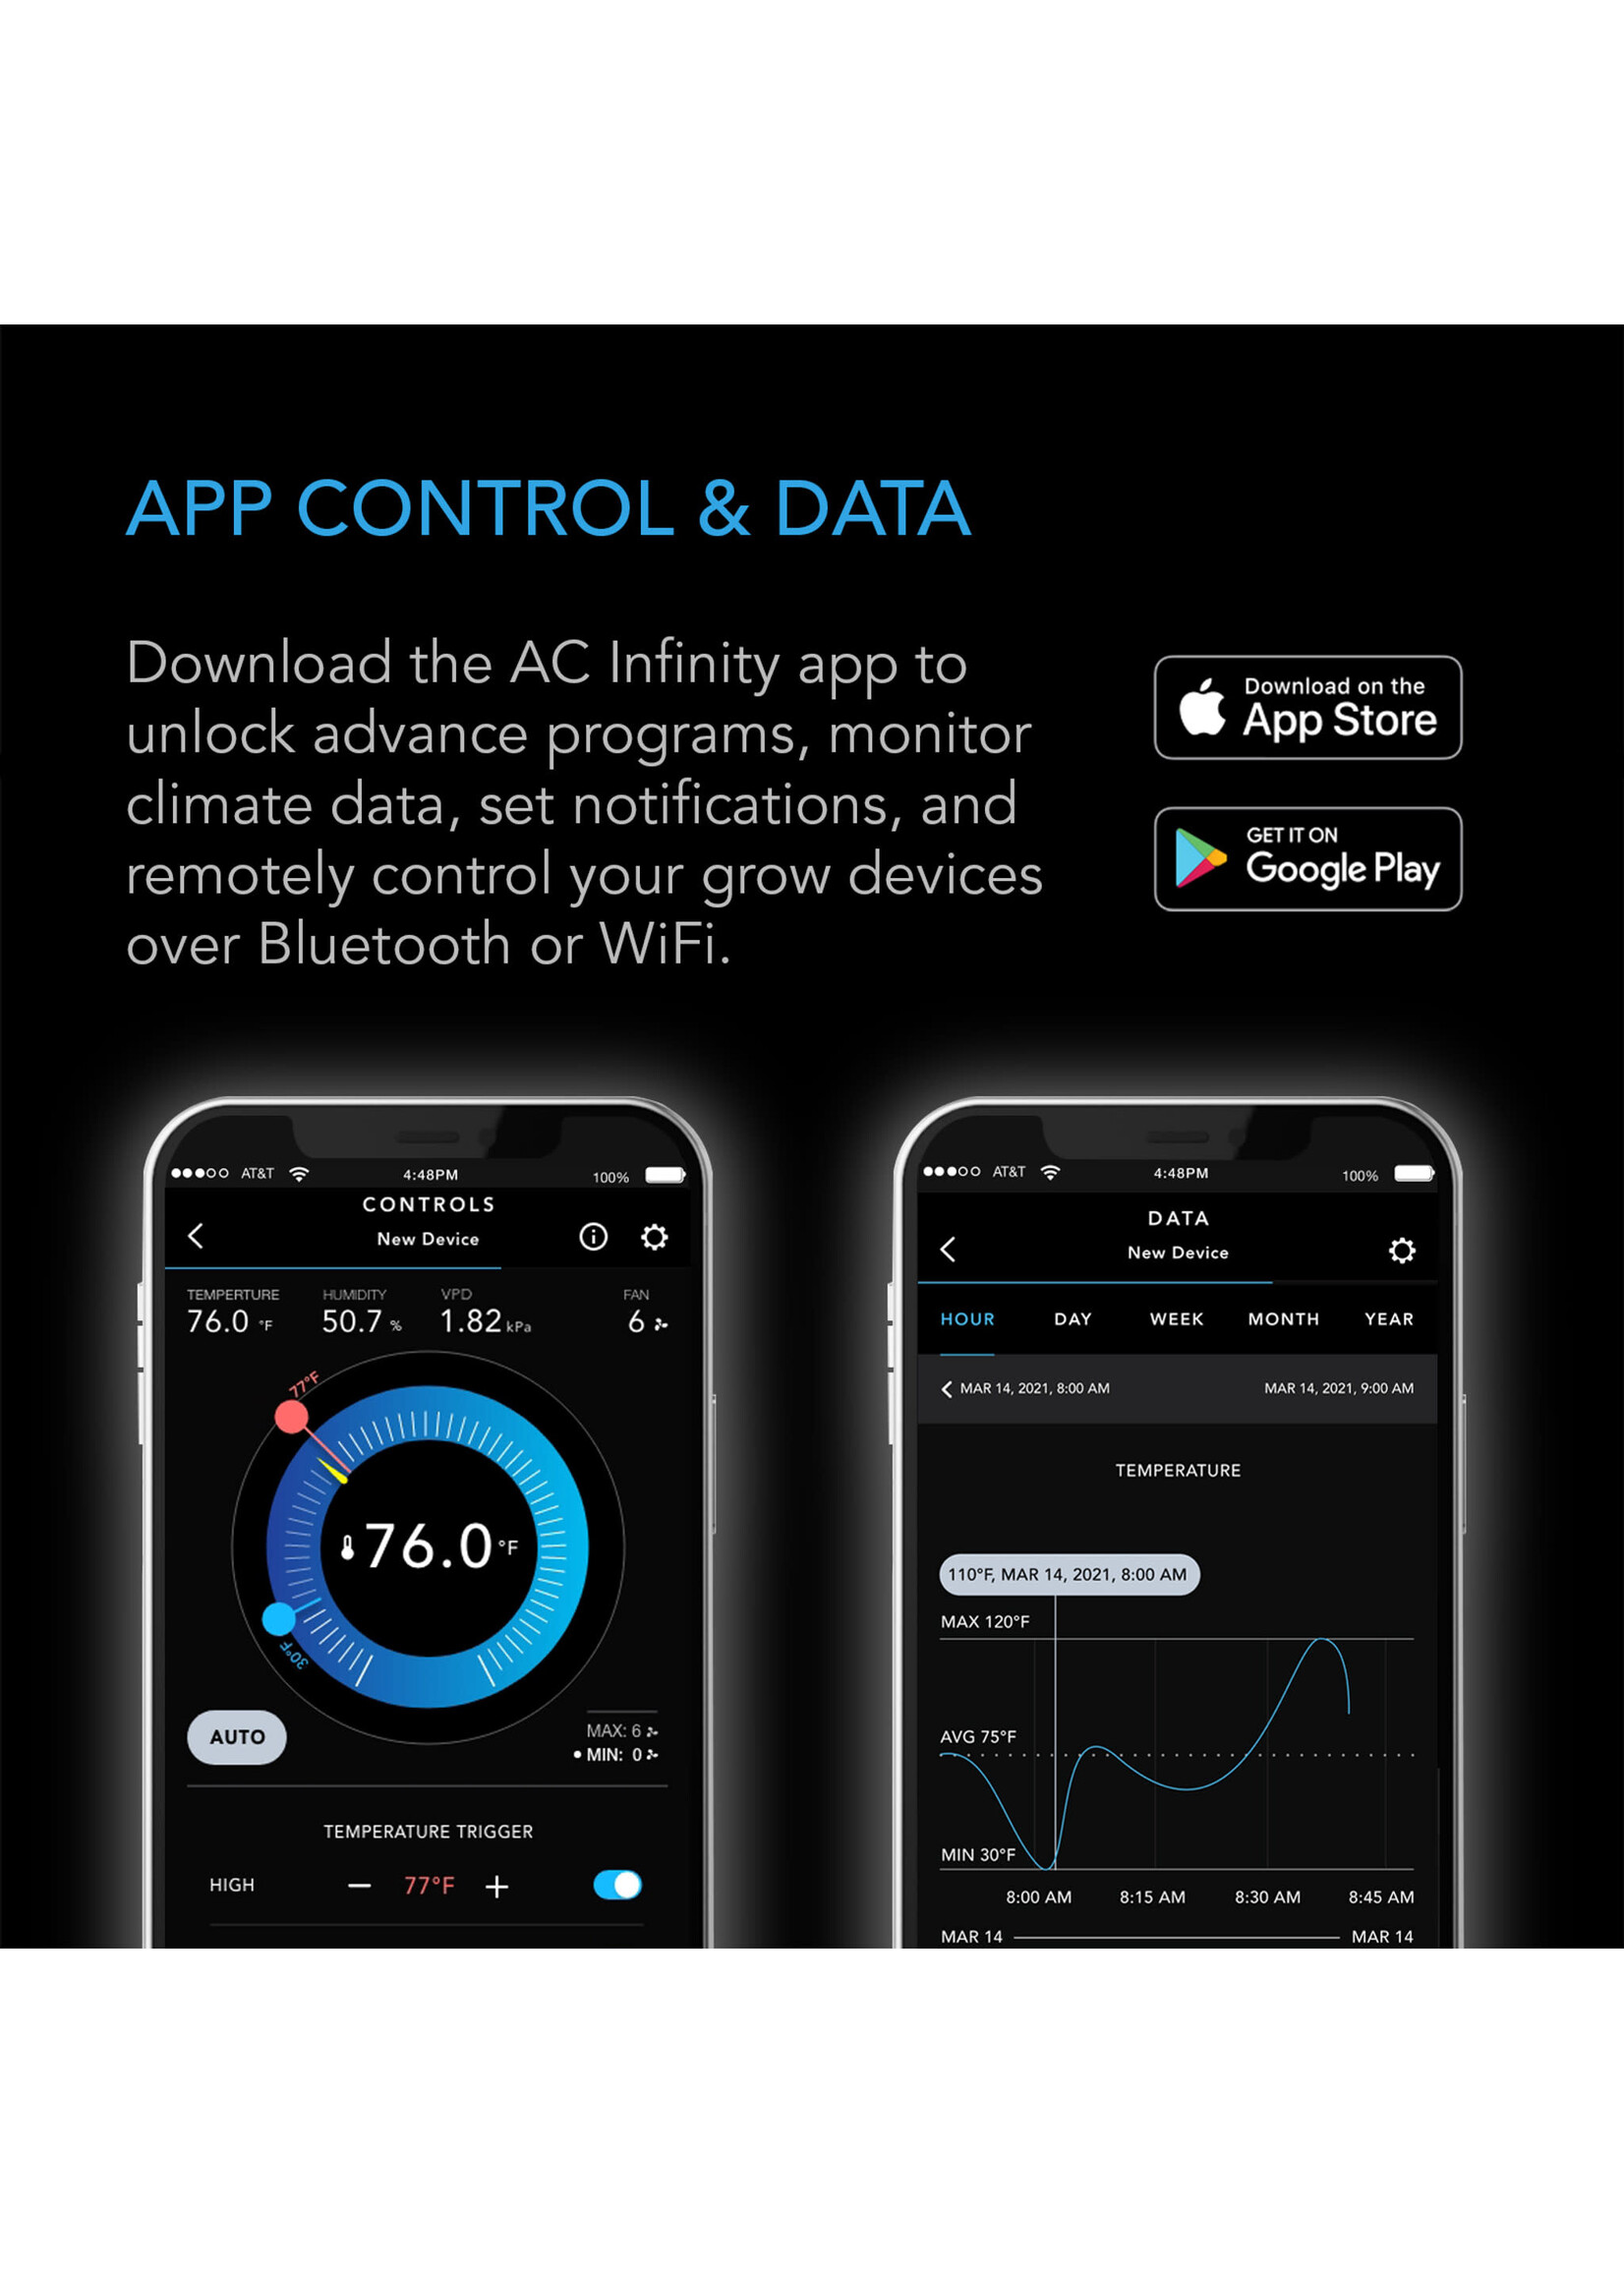 AC Infinity AC Infinity CONTROLLER 69 PRO+ INDEPENDENT PROGRAMS FOR EIGHT DEVICES, DYNAMIC VPD, TEMPERATURE, HUMIDITY, SCHEDULING, CYCLES, LEVELS CONTROL, DATA APP, BLUETOOTH + WIFI